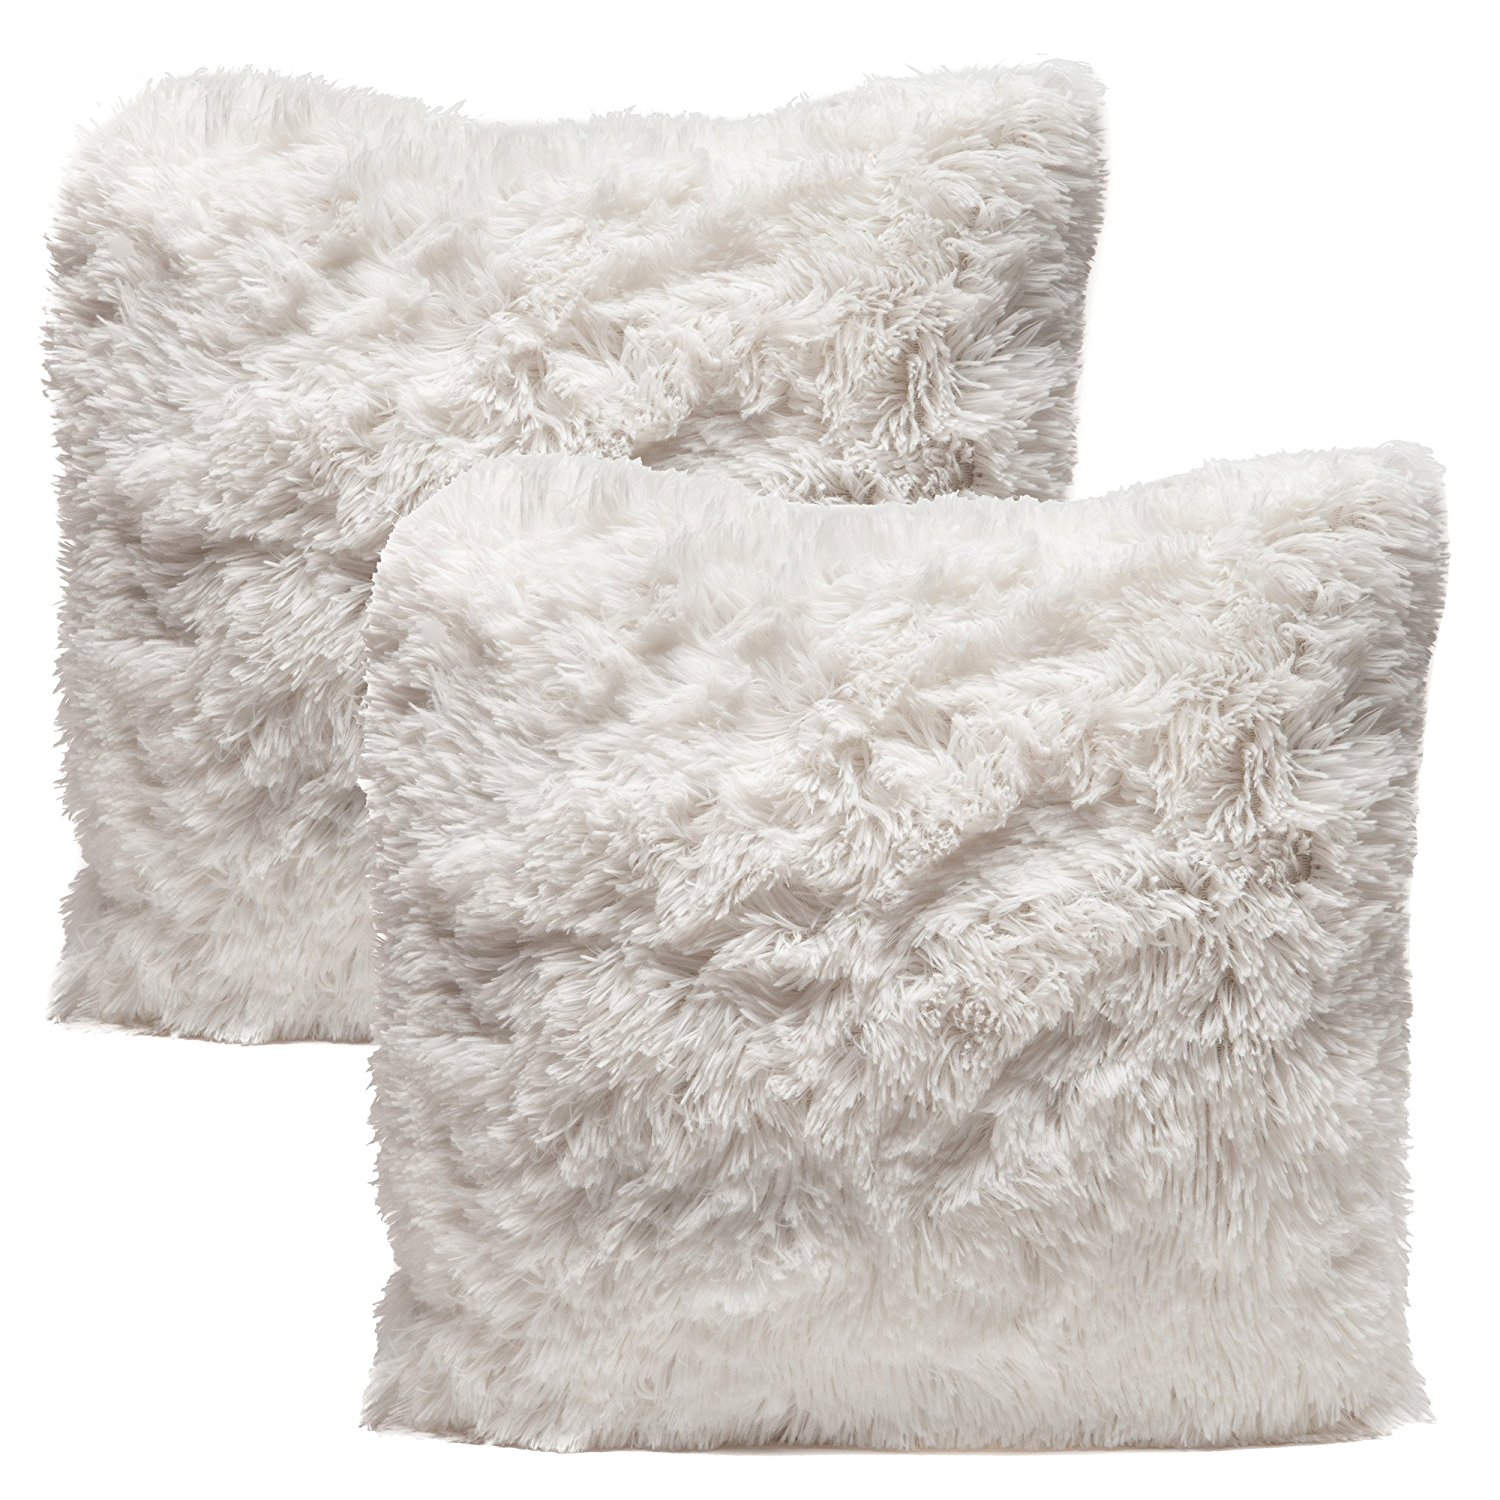 Chanasya Super Soft Shaggy Chic Fuzzy Faux Fur Elegant Cozy White Throw Pillow Cover Pillow Sham - Solid White Fur Throw Pillowcase 18x18 Inches 2-Pack(Pillow Insert Not Included)